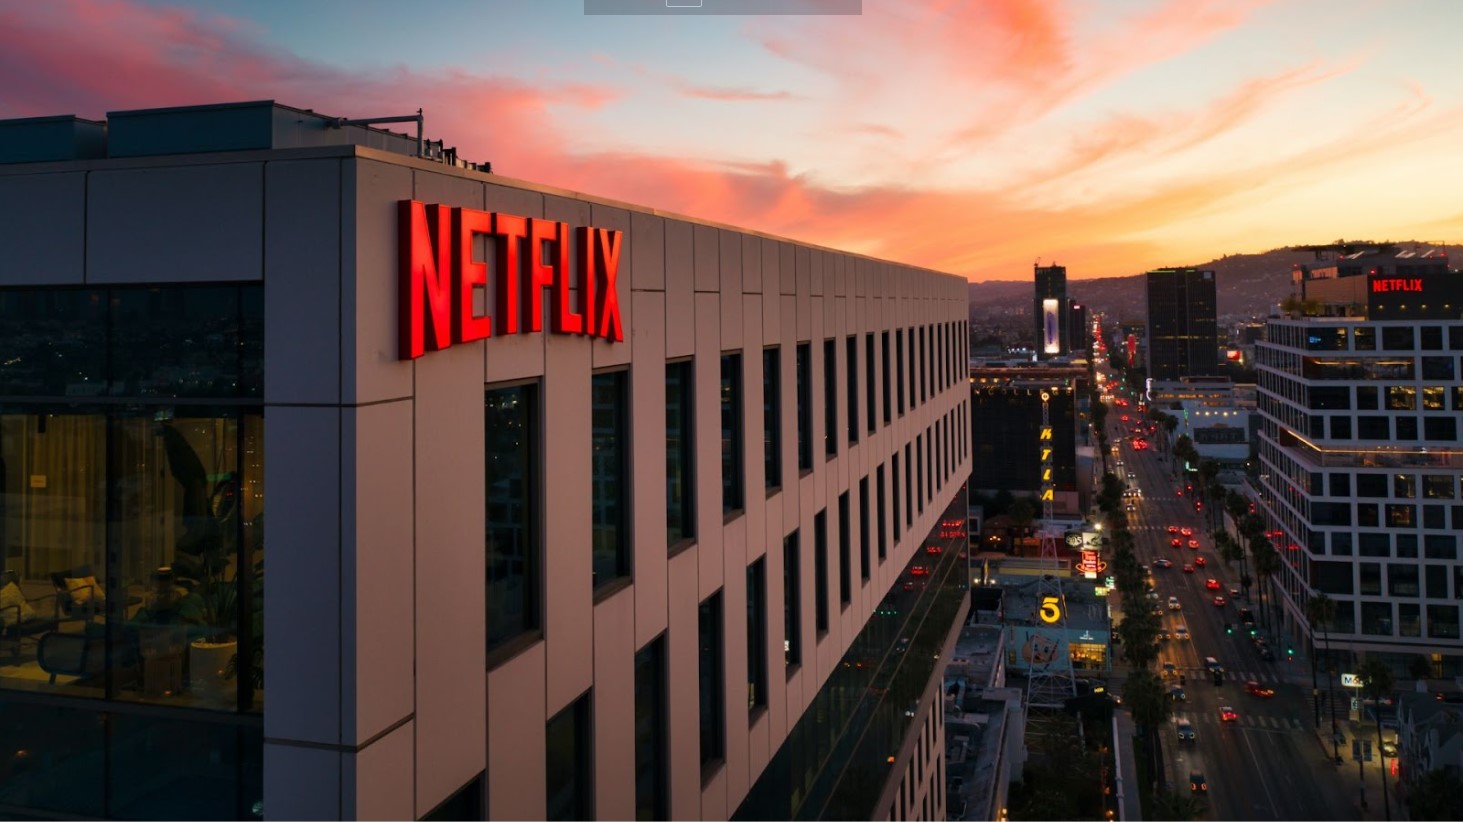 The Netflix logo illuminated in red on the side of a modern office building during sunset, with the cityscape of Los Angeles and streets with moving traffic in the background